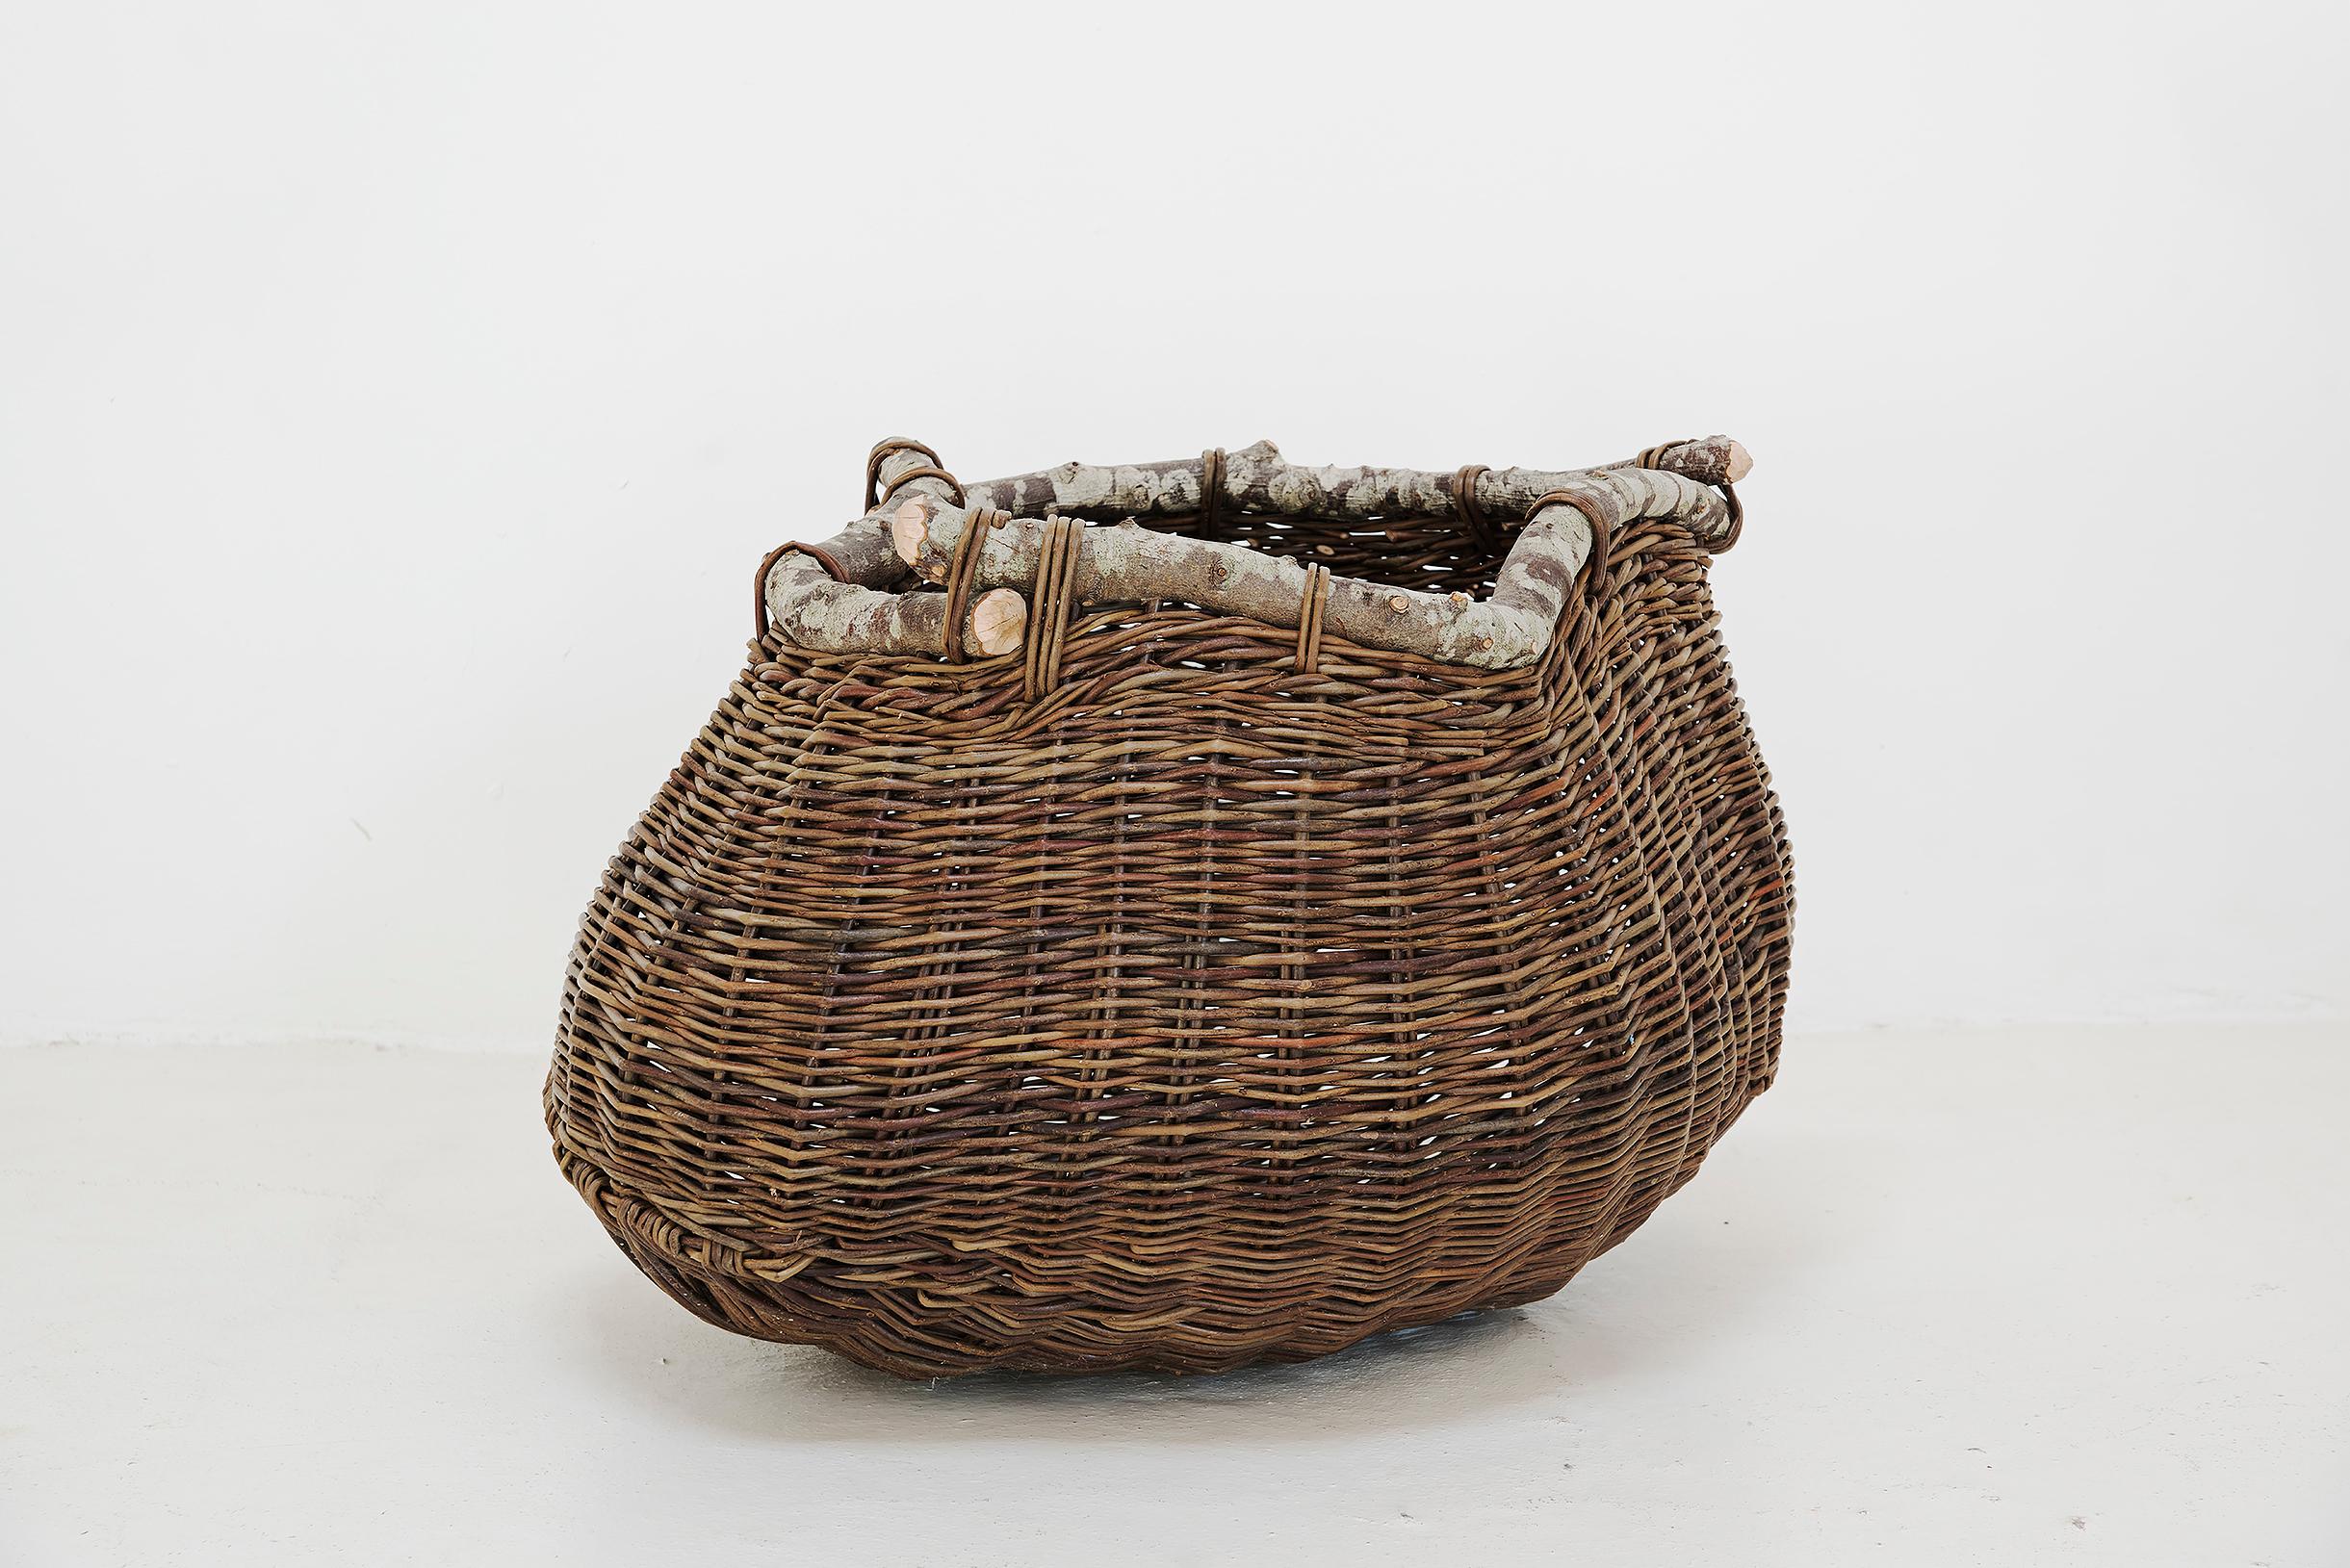 This basket by master basket-maker Joe Hogan showcases his deep understanding between material, craft and place. Using materials grown or found himself, Hogan works with over 20 different varieties of willow, harvesting annually from late November